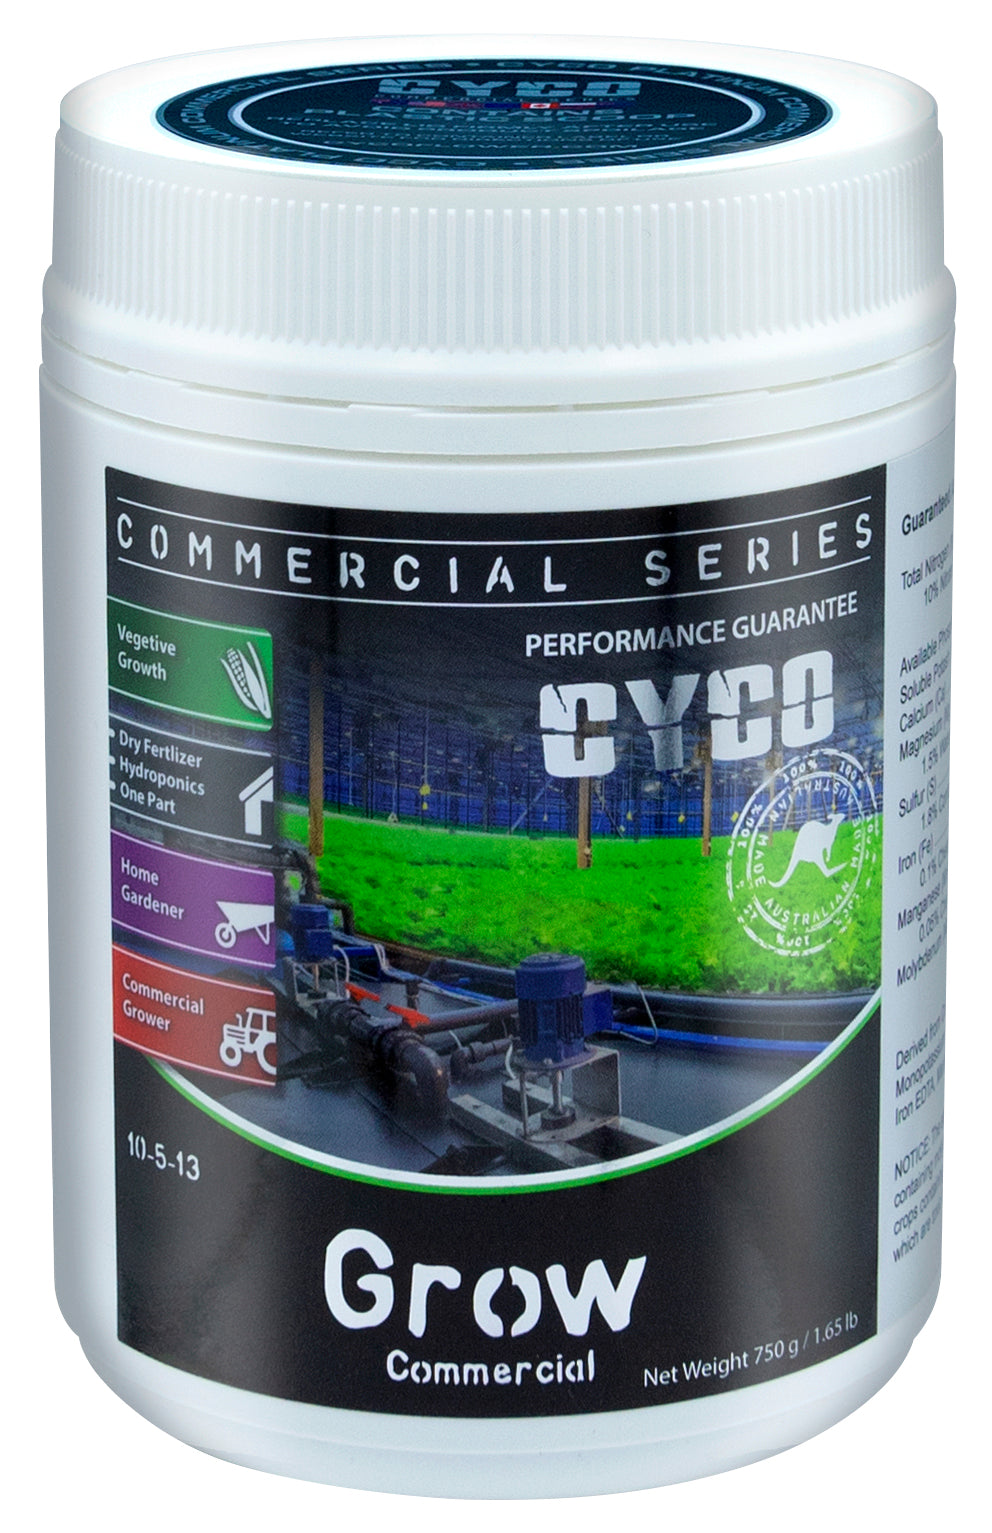 CYCO Commercial Series Grow 10 - 5 - 13